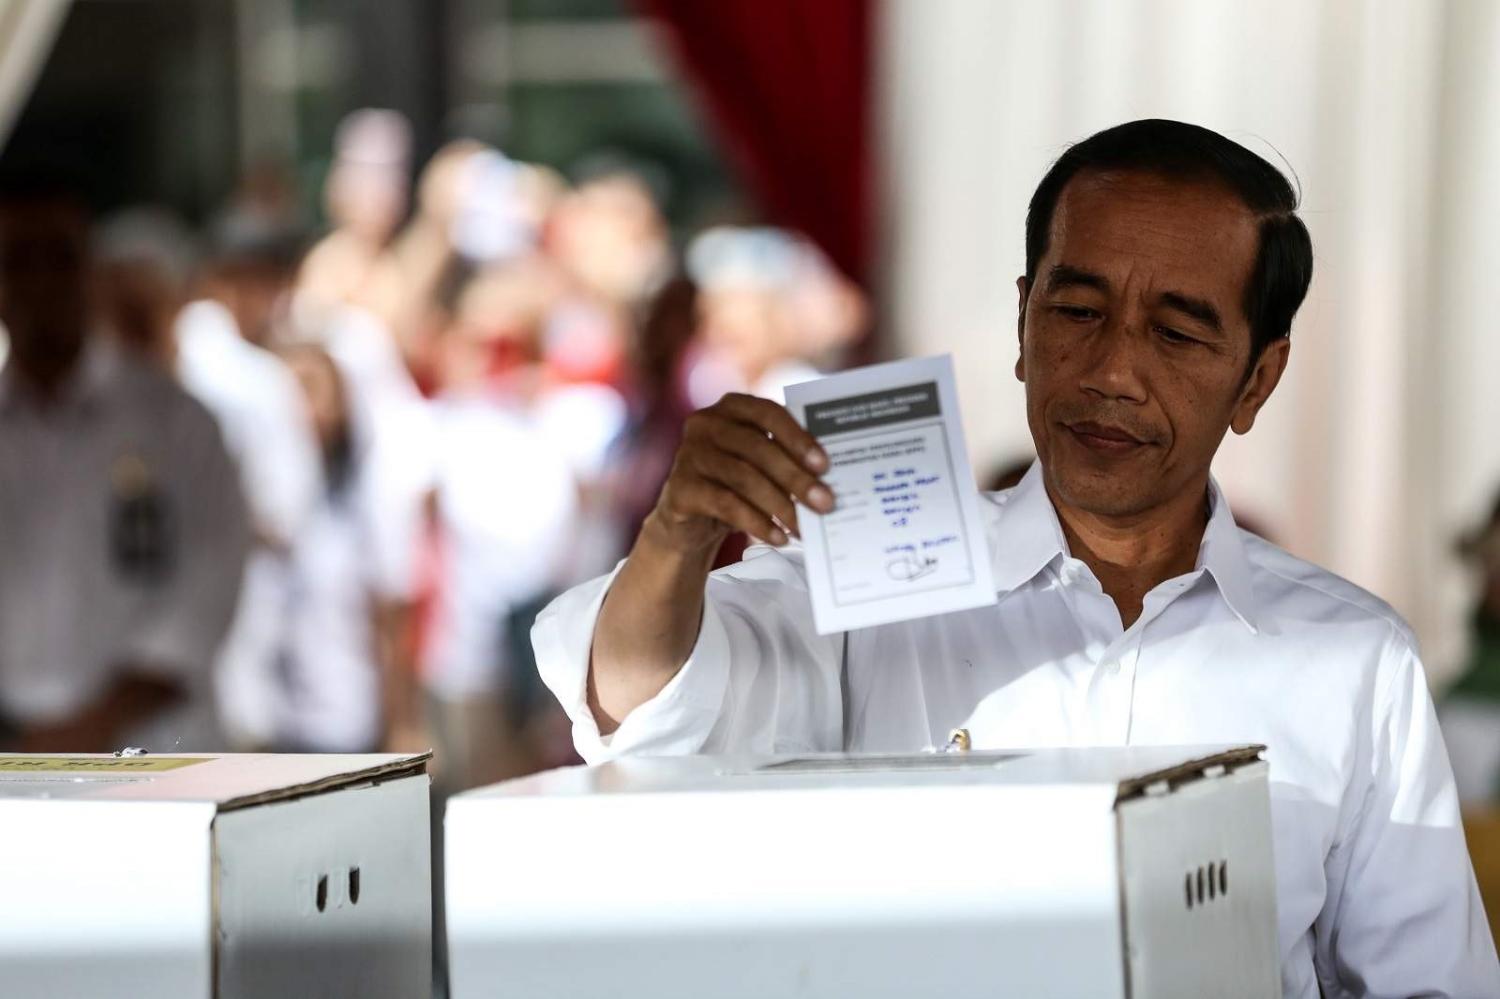 Indonesian President Joko Widodo votes during the 2019 election at a polling station in Jakarta, 17 April 2019 (Andrew Gal/NurPhoto via Getty Images)